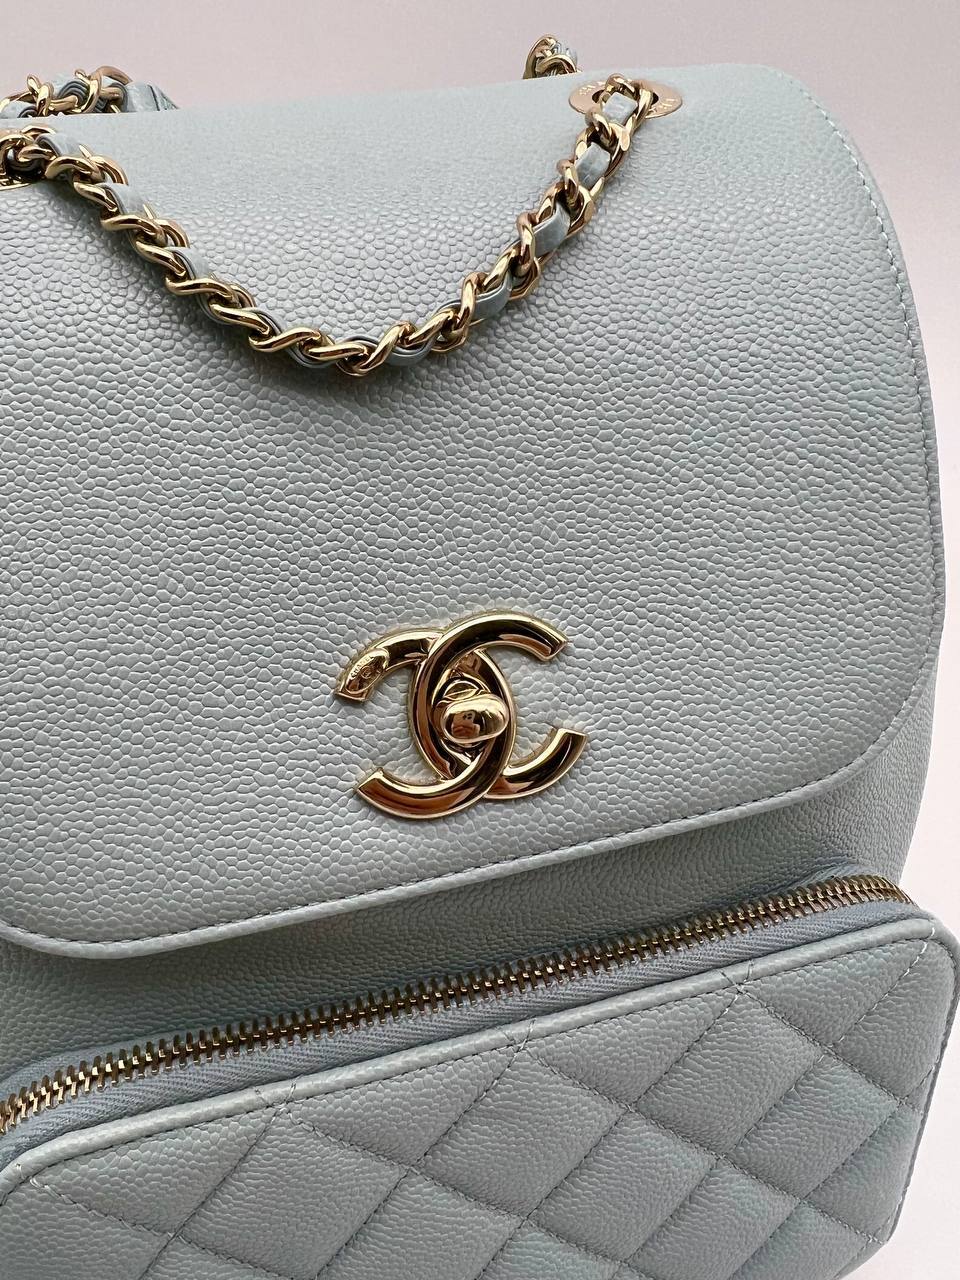 Chanel Business Affinity Large, Beige Caviar with Gold Hardware, Preowned  in Dustbag WA001 - Julia Rose Boston